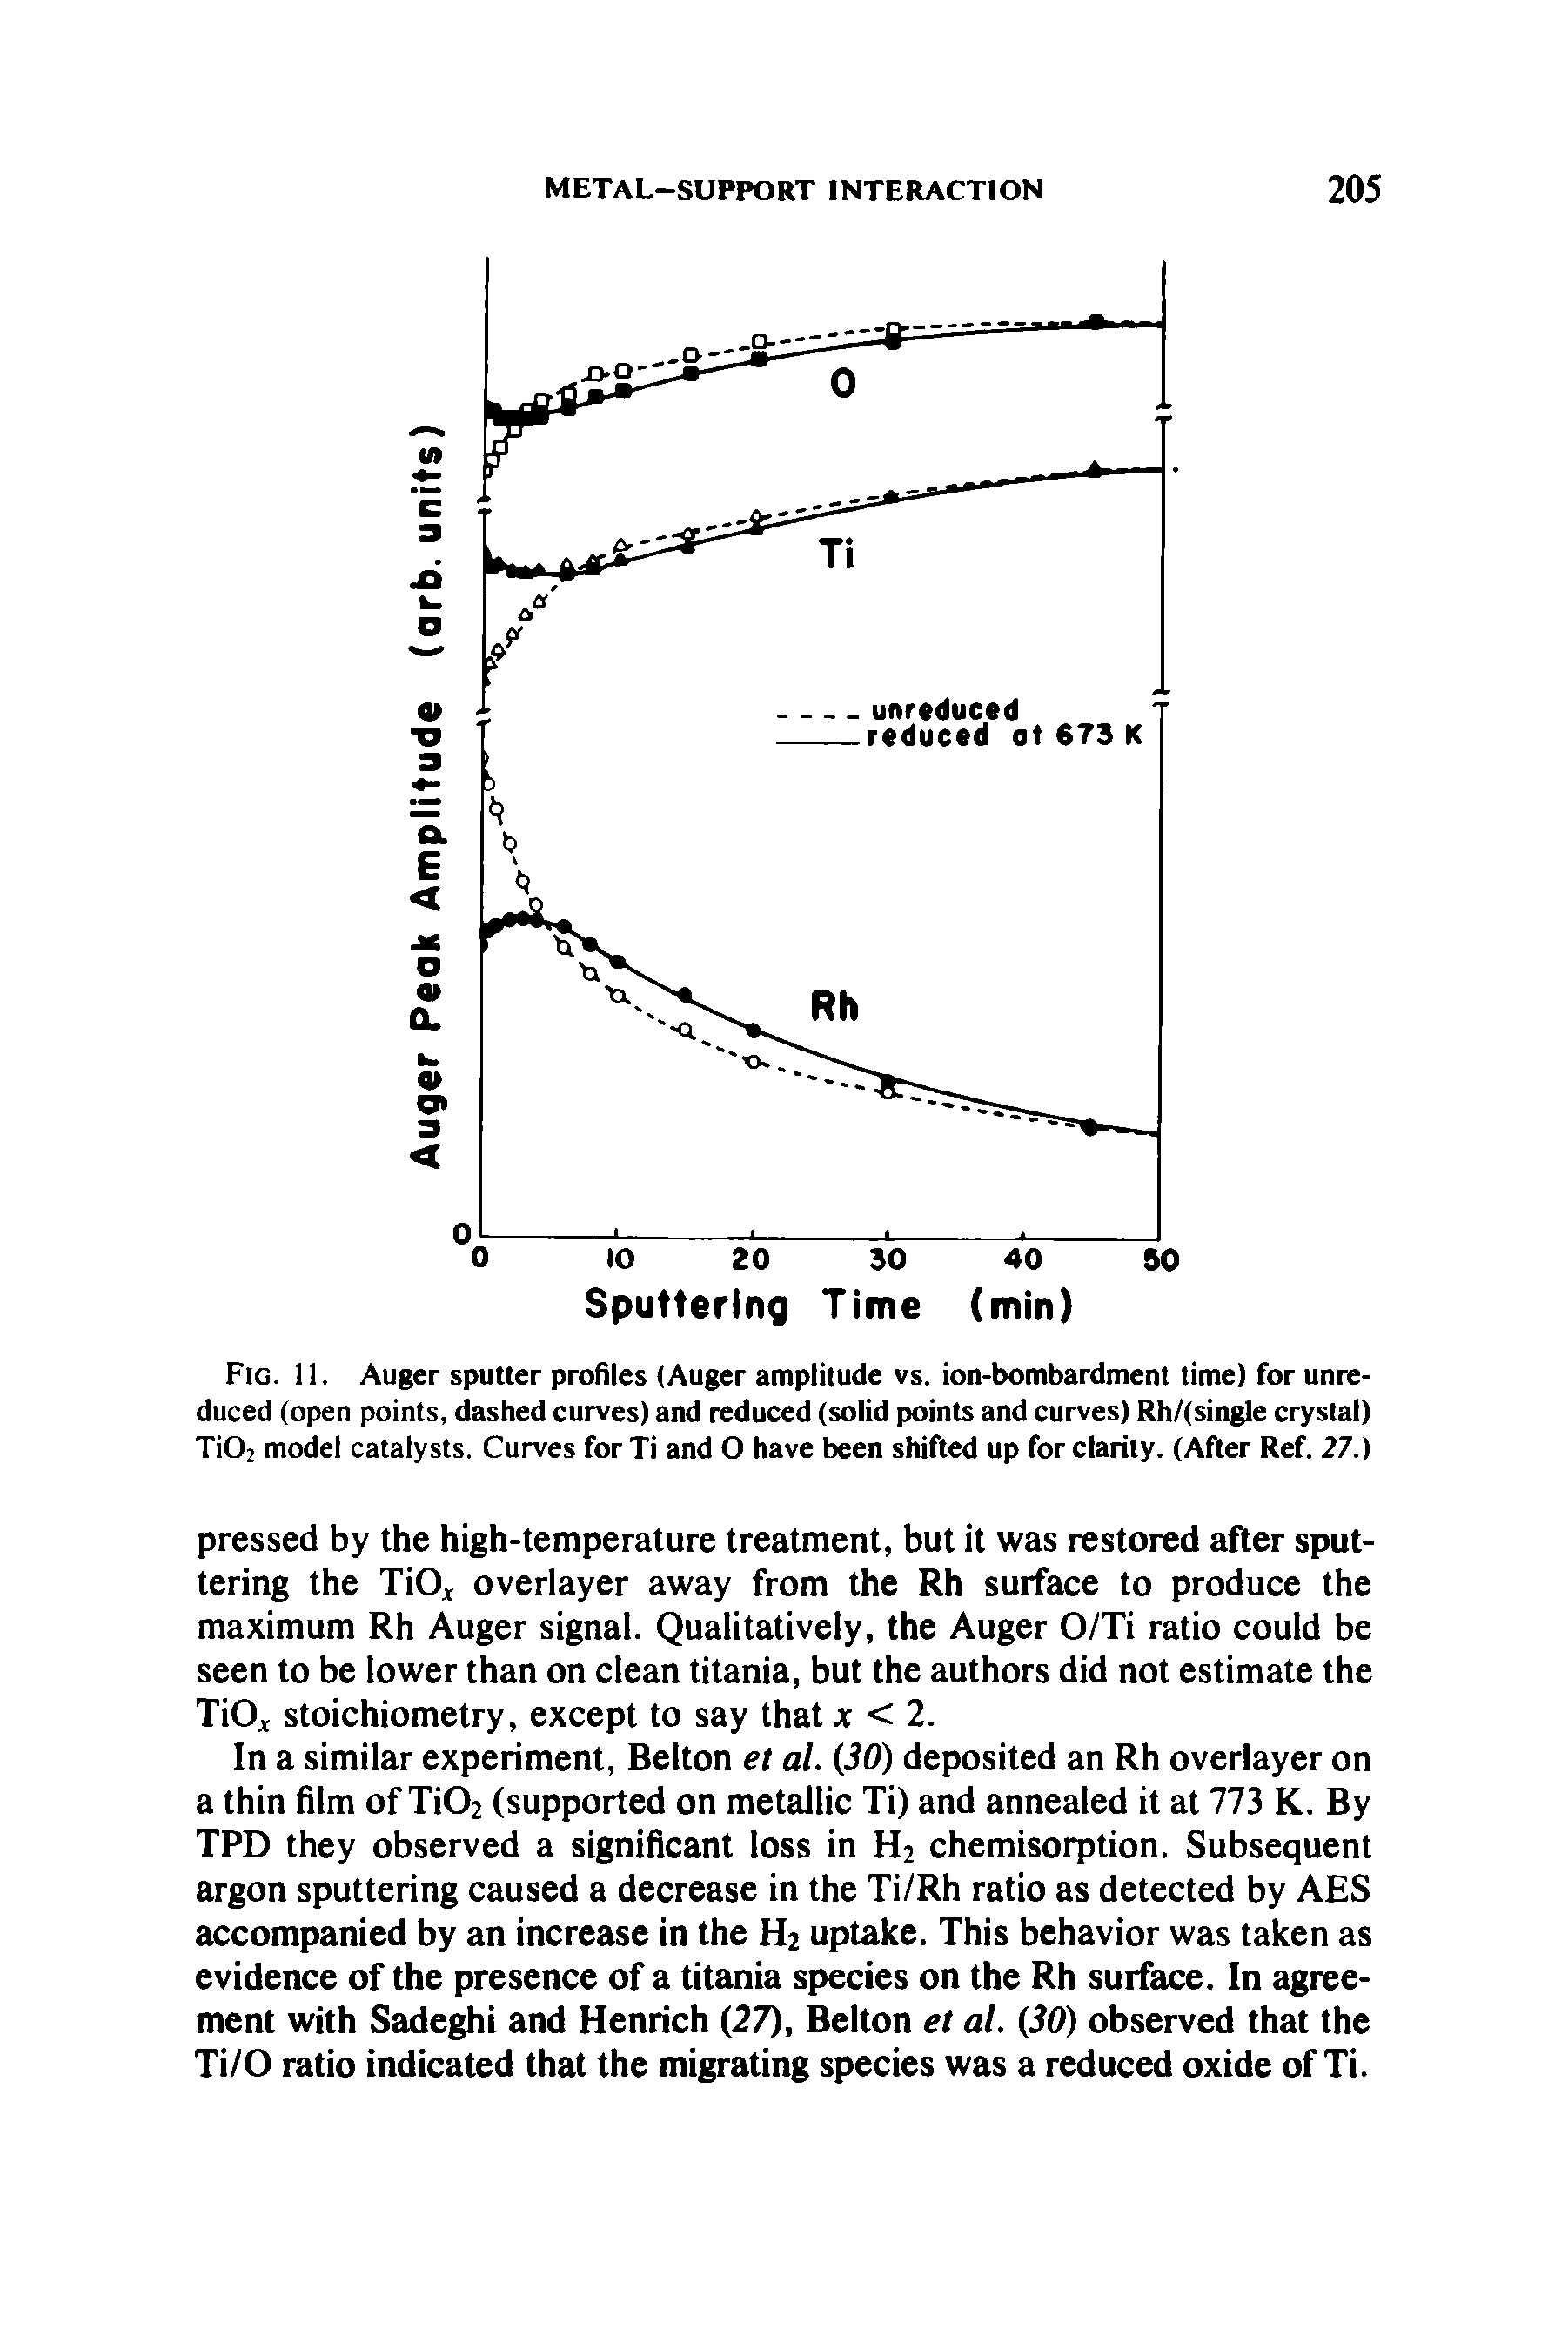 Fig. 11. Auger sputter profiles (Auger amplitude vs. ion-bombardment time) for unreduced (open points, dashed curves) and reduced (solid points and curves) Rh/(single crystal) Ti02 model catalysts. Curves for Ti and O have been shifted up for clarity. (After Ref. 27.)...